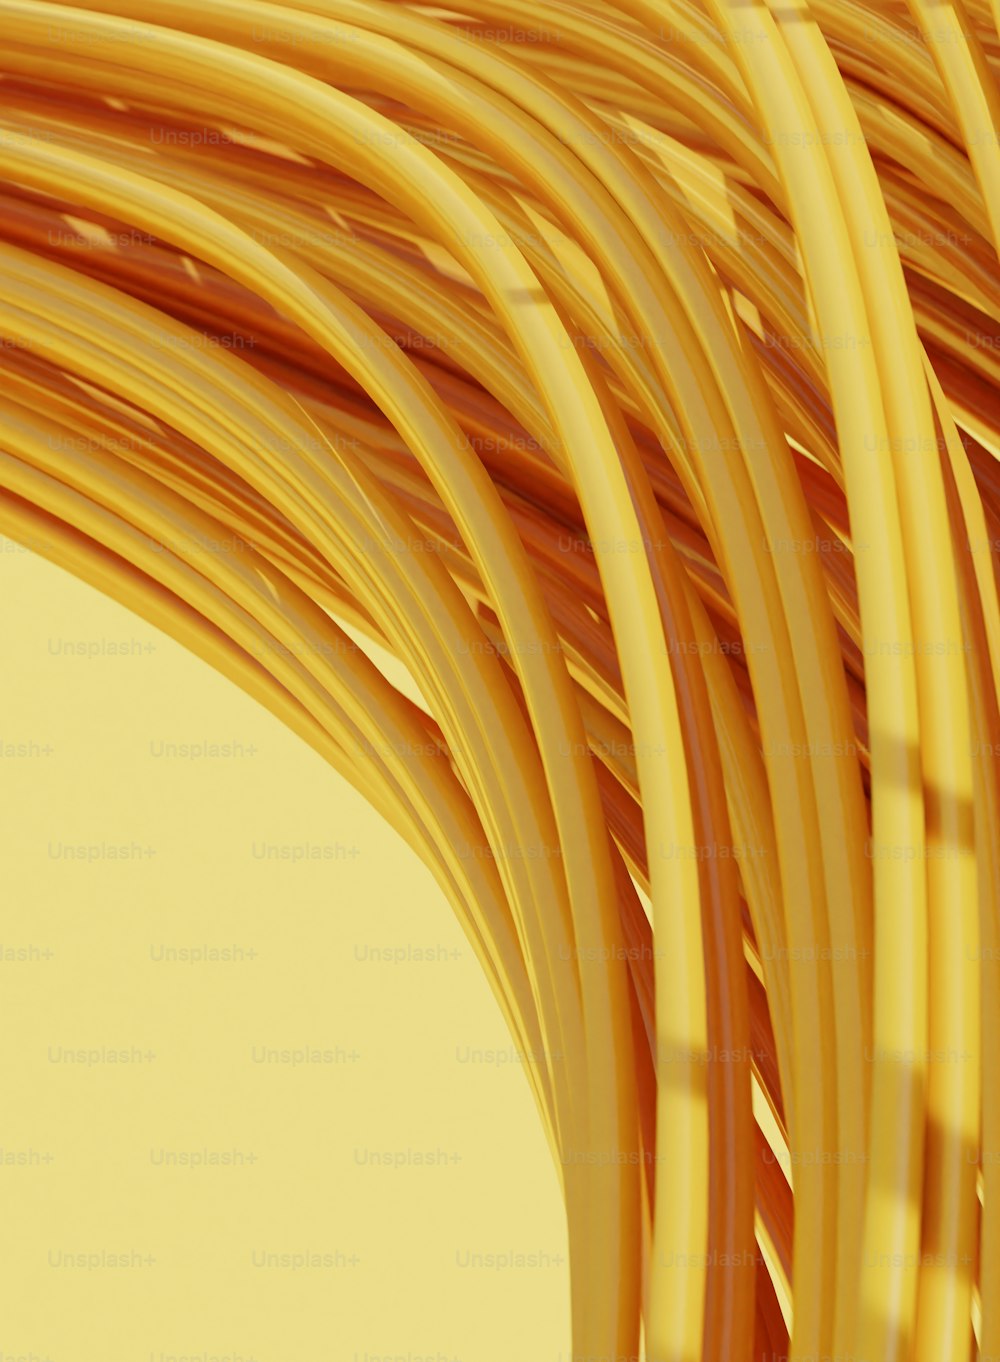 a close up of a bunch of yellow wires